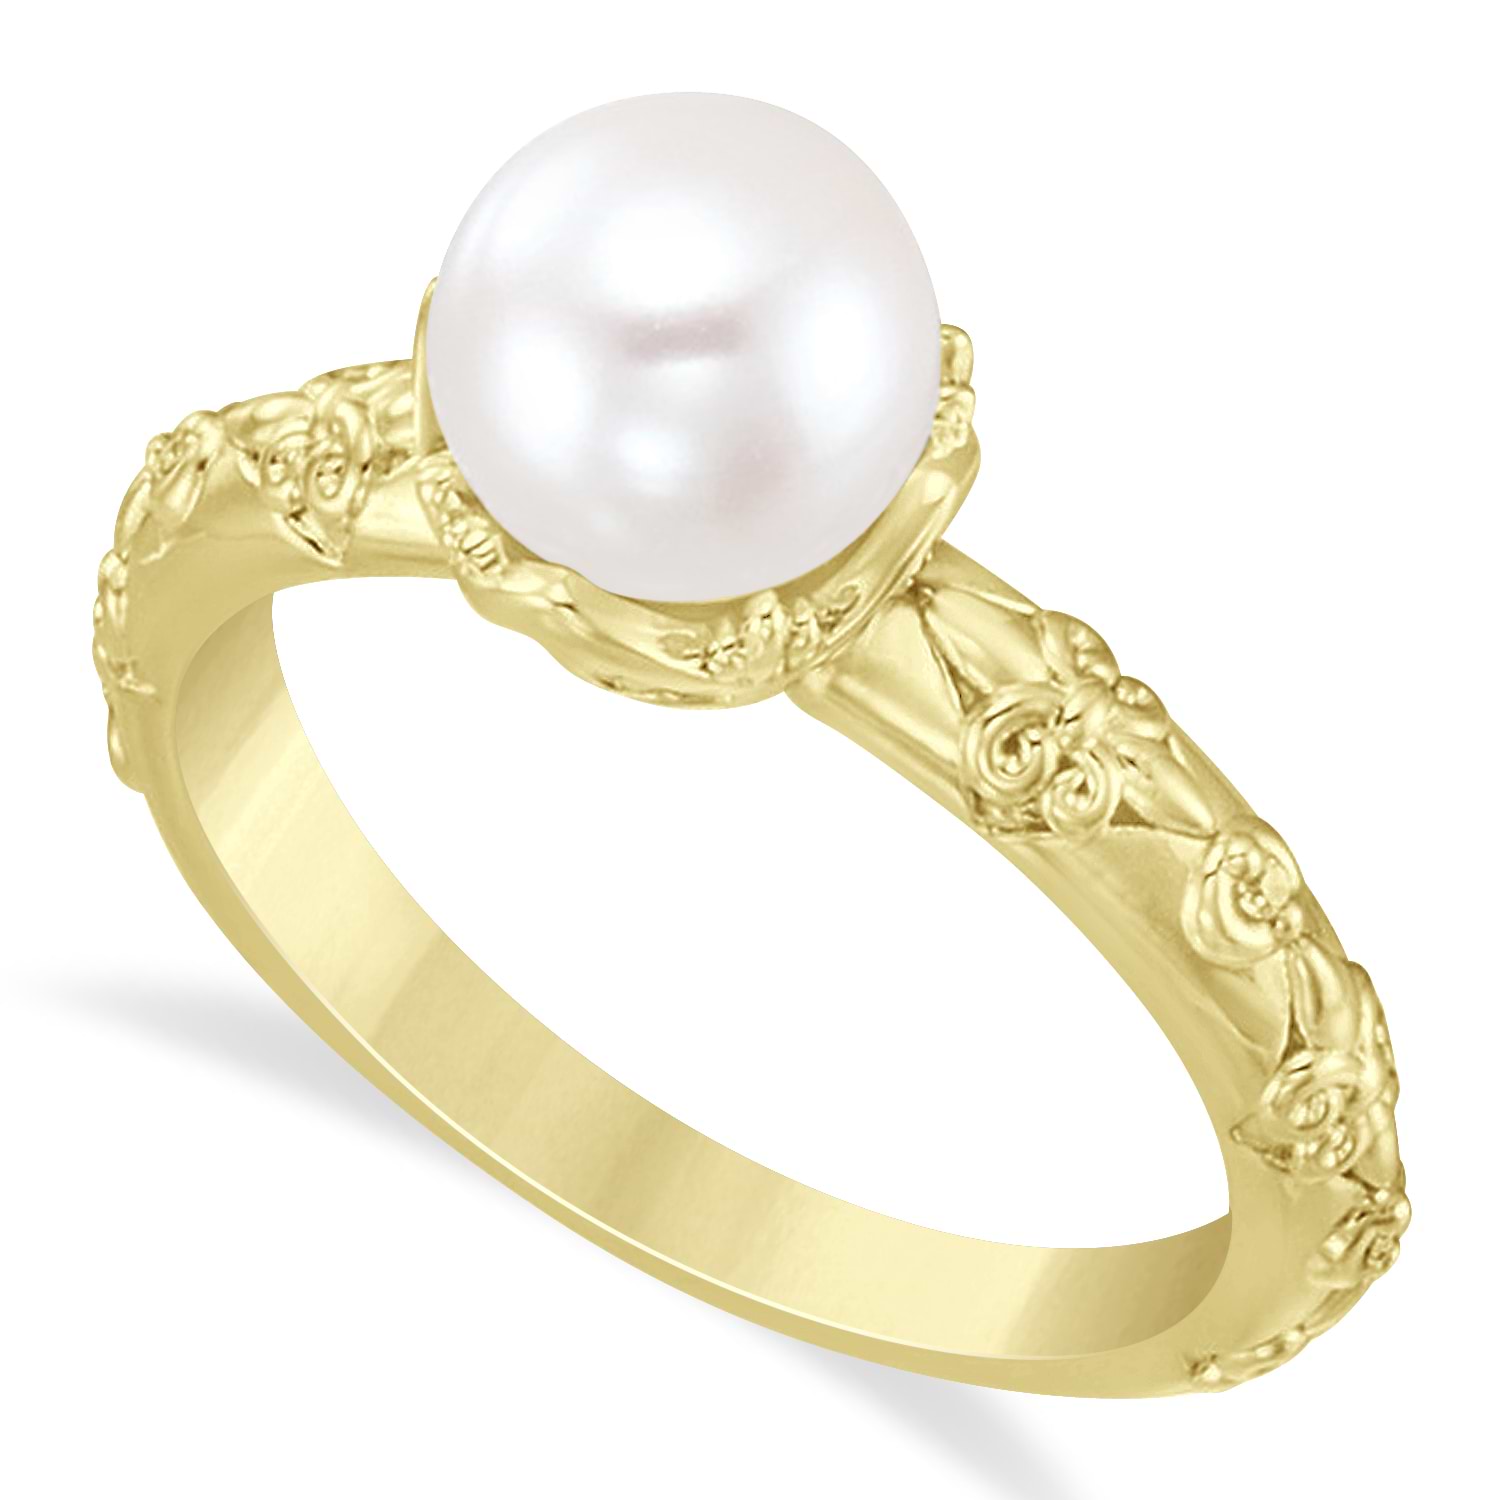 Vintage-Inspired Freshwater Pearl & Diamond Ring 14k Yellow Gold (7.0-7.5mm)